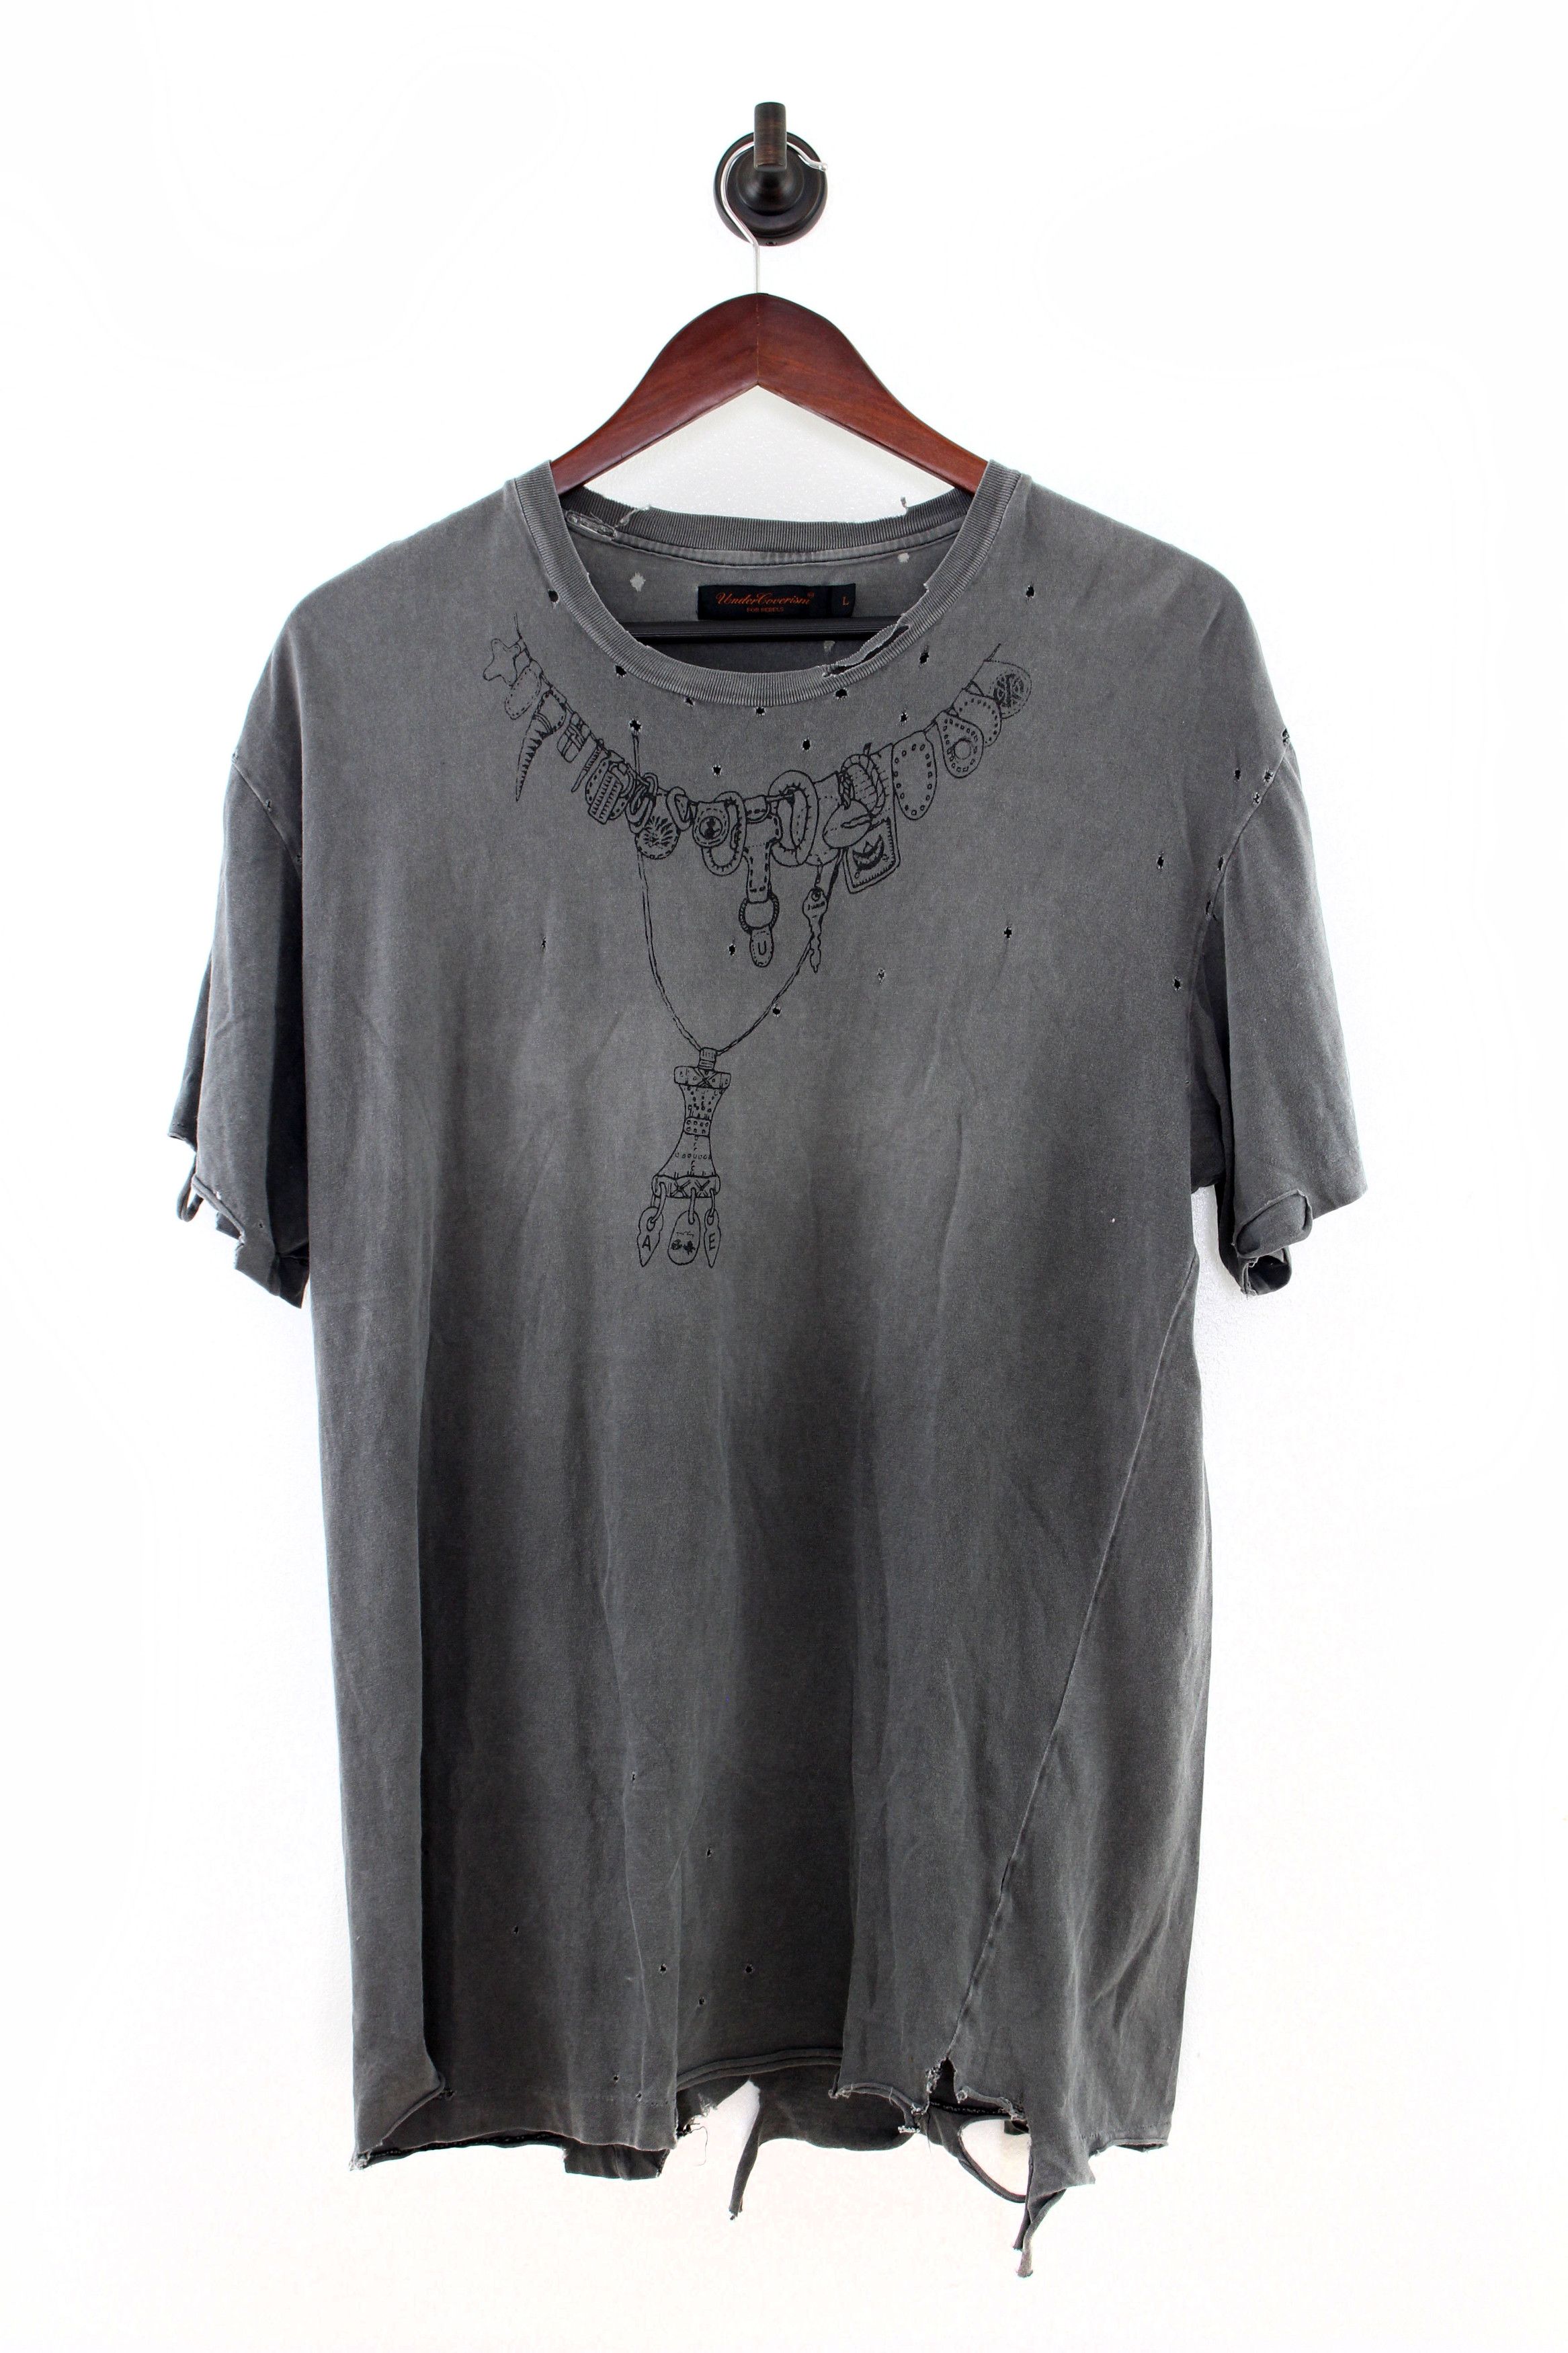 Undercover Distressed Scab Tee | Grailed